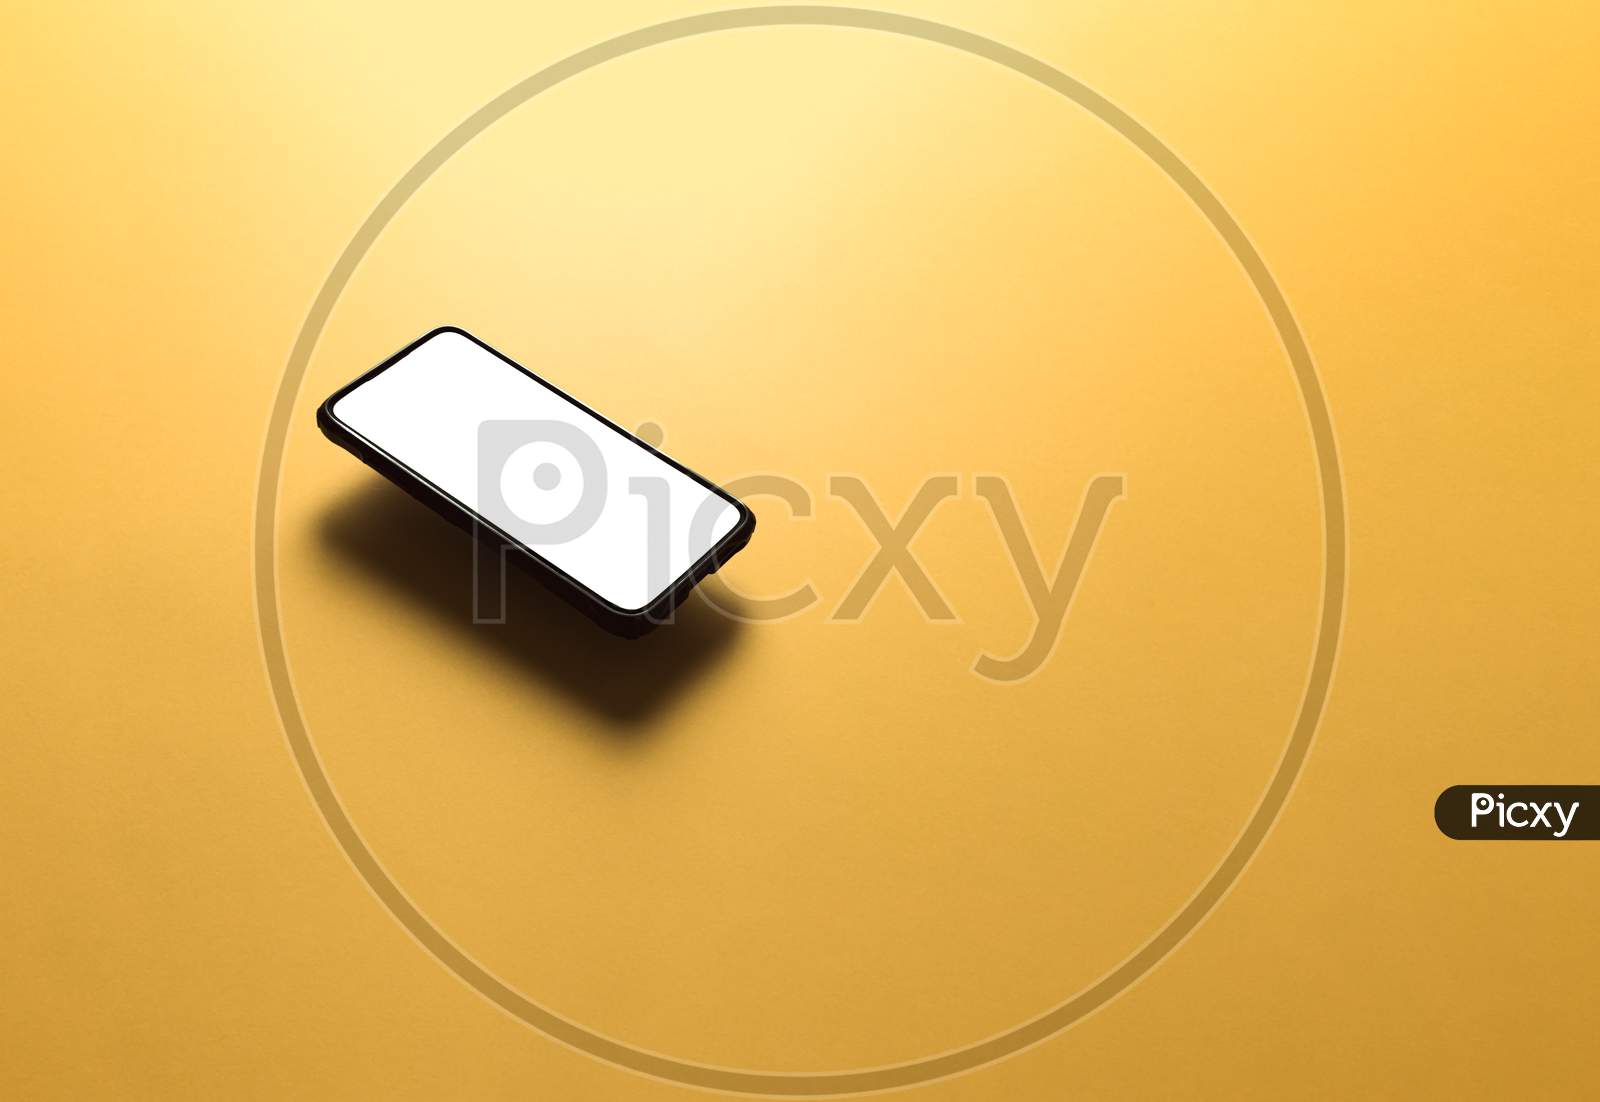 Minimalistic Mock Up Flat Image Design With A Floating Mobile Phone With Copy Space And White Scree To Write Over It Over A Flat Yellow Background